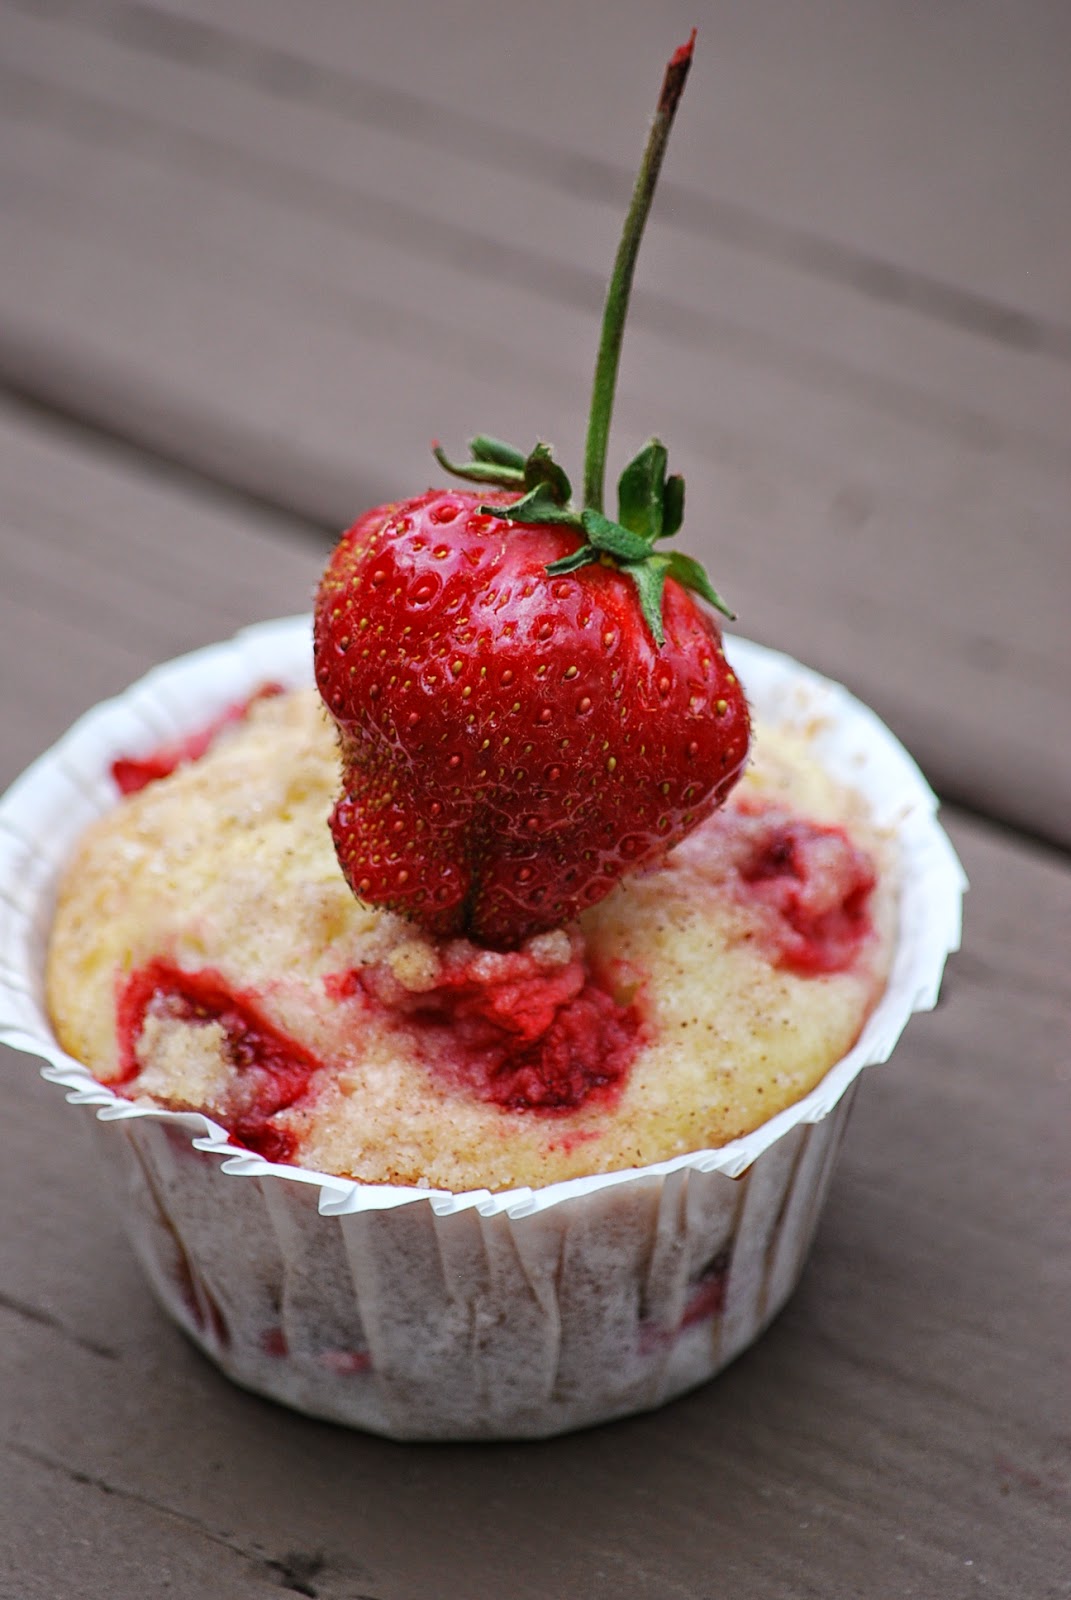 My story in recipes: Strawberry Cheesecake Muffins